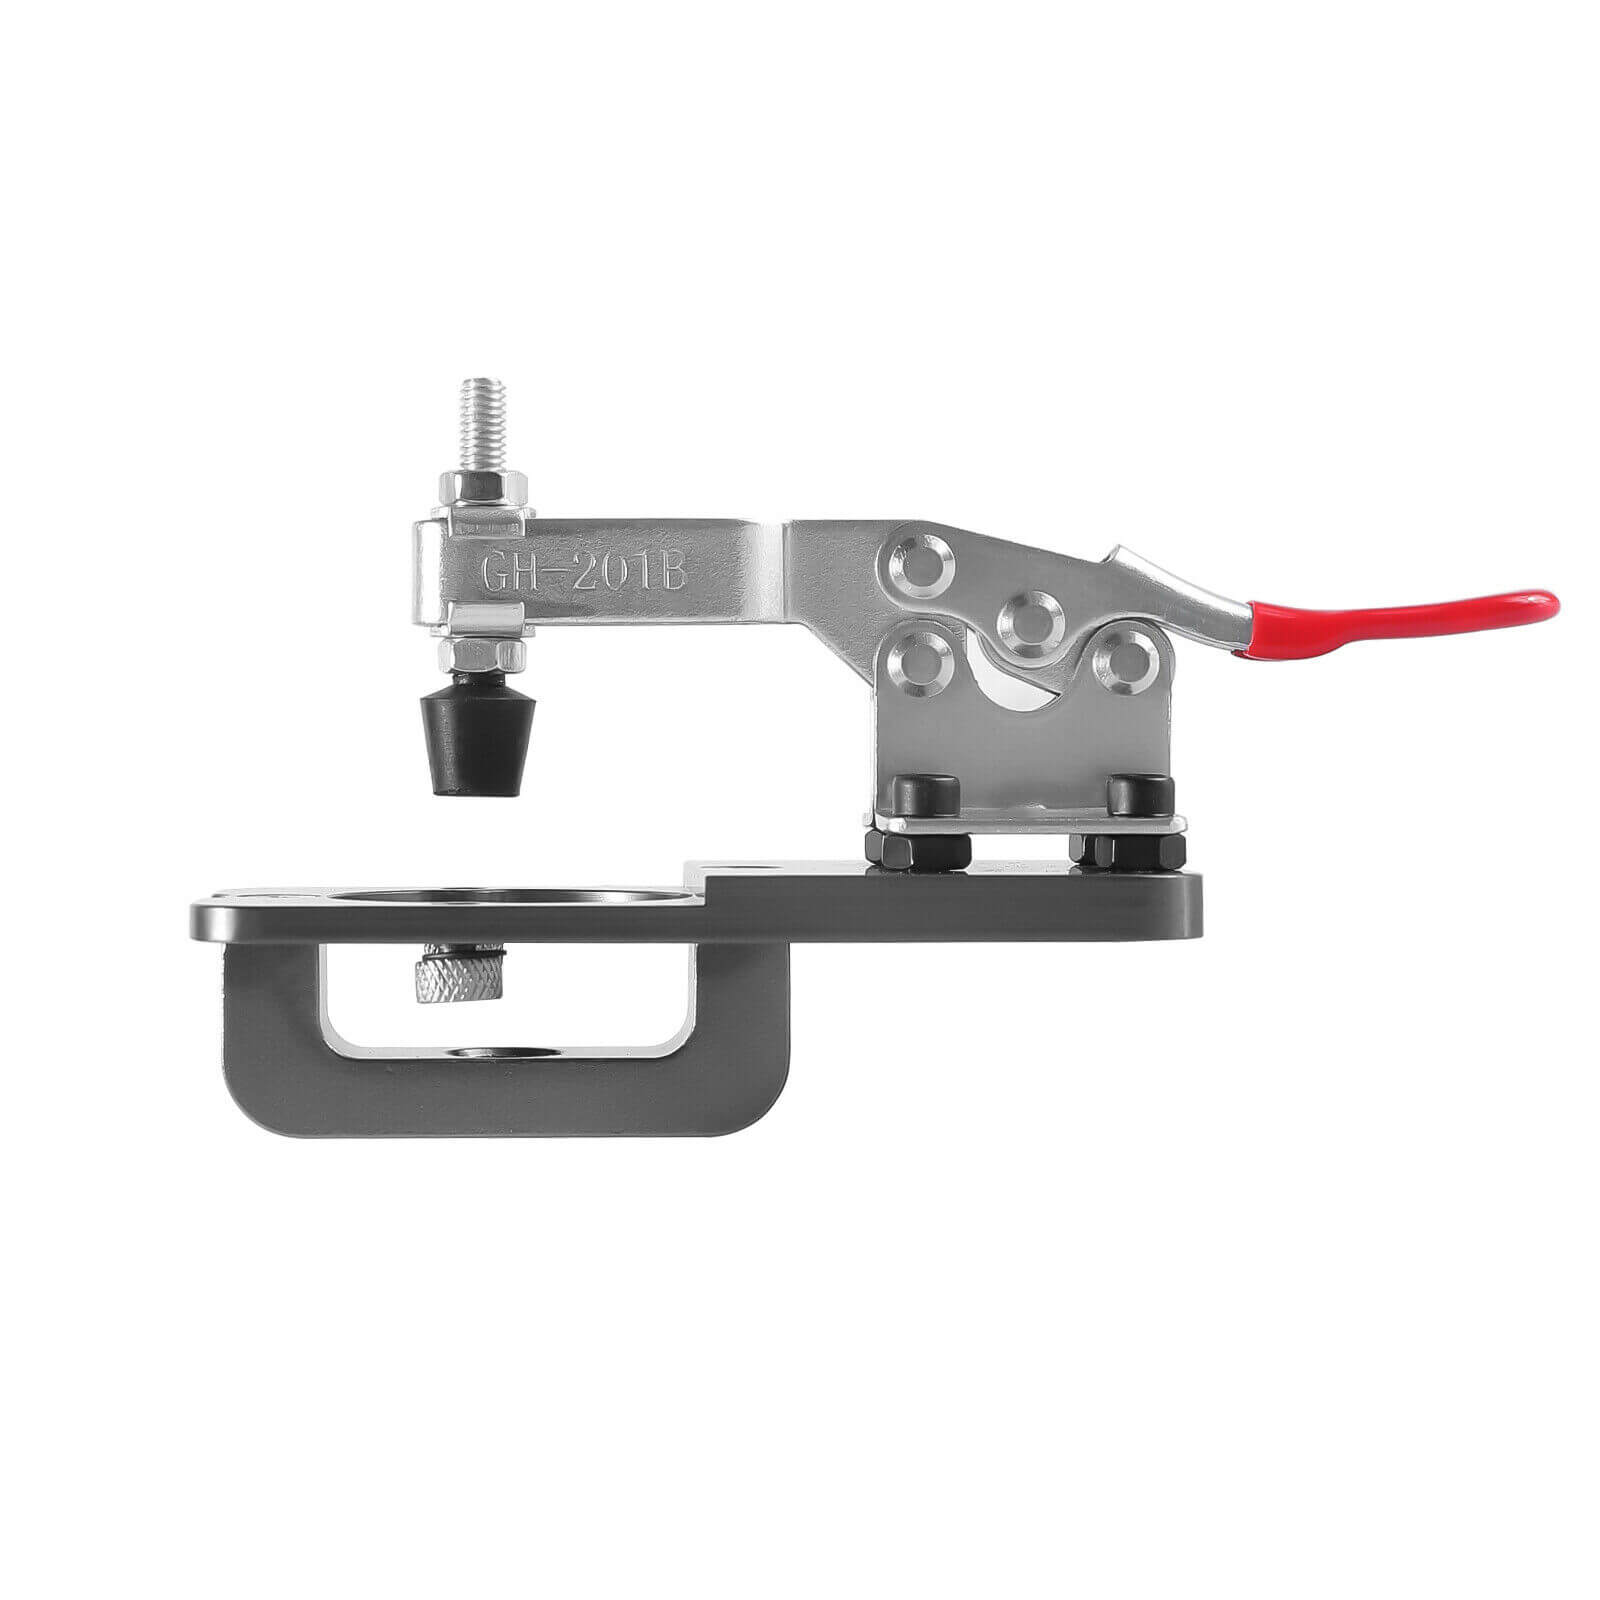 Side Display of Durable 35mm Hinge Hole Jig Punch Locator Kit